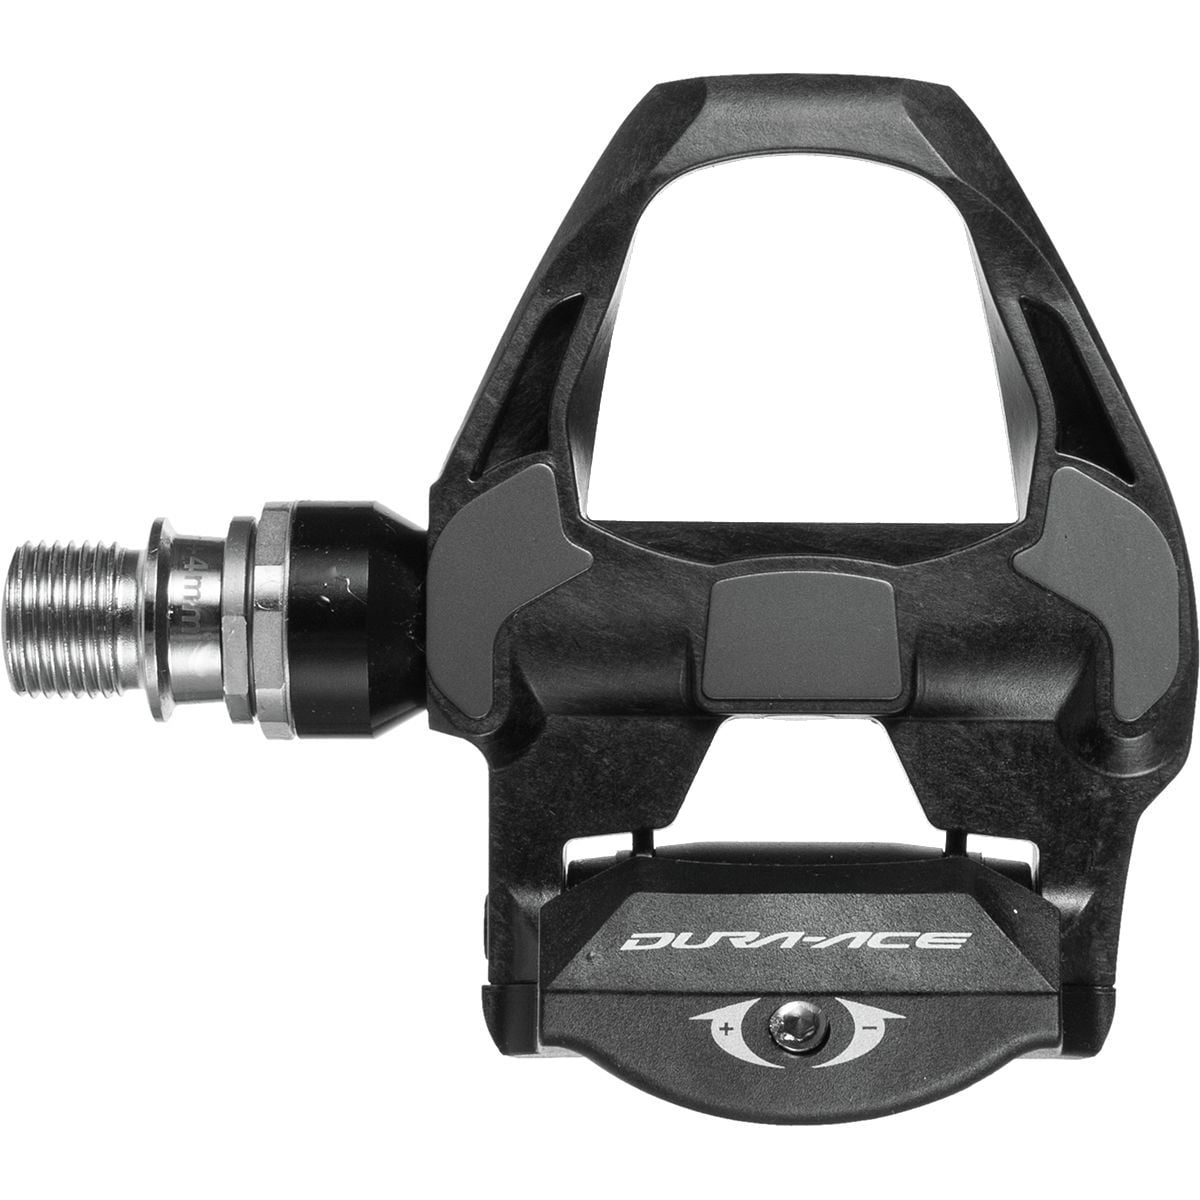 Shimano Dura Ace PD R9100 4mm SPD SL Pedals